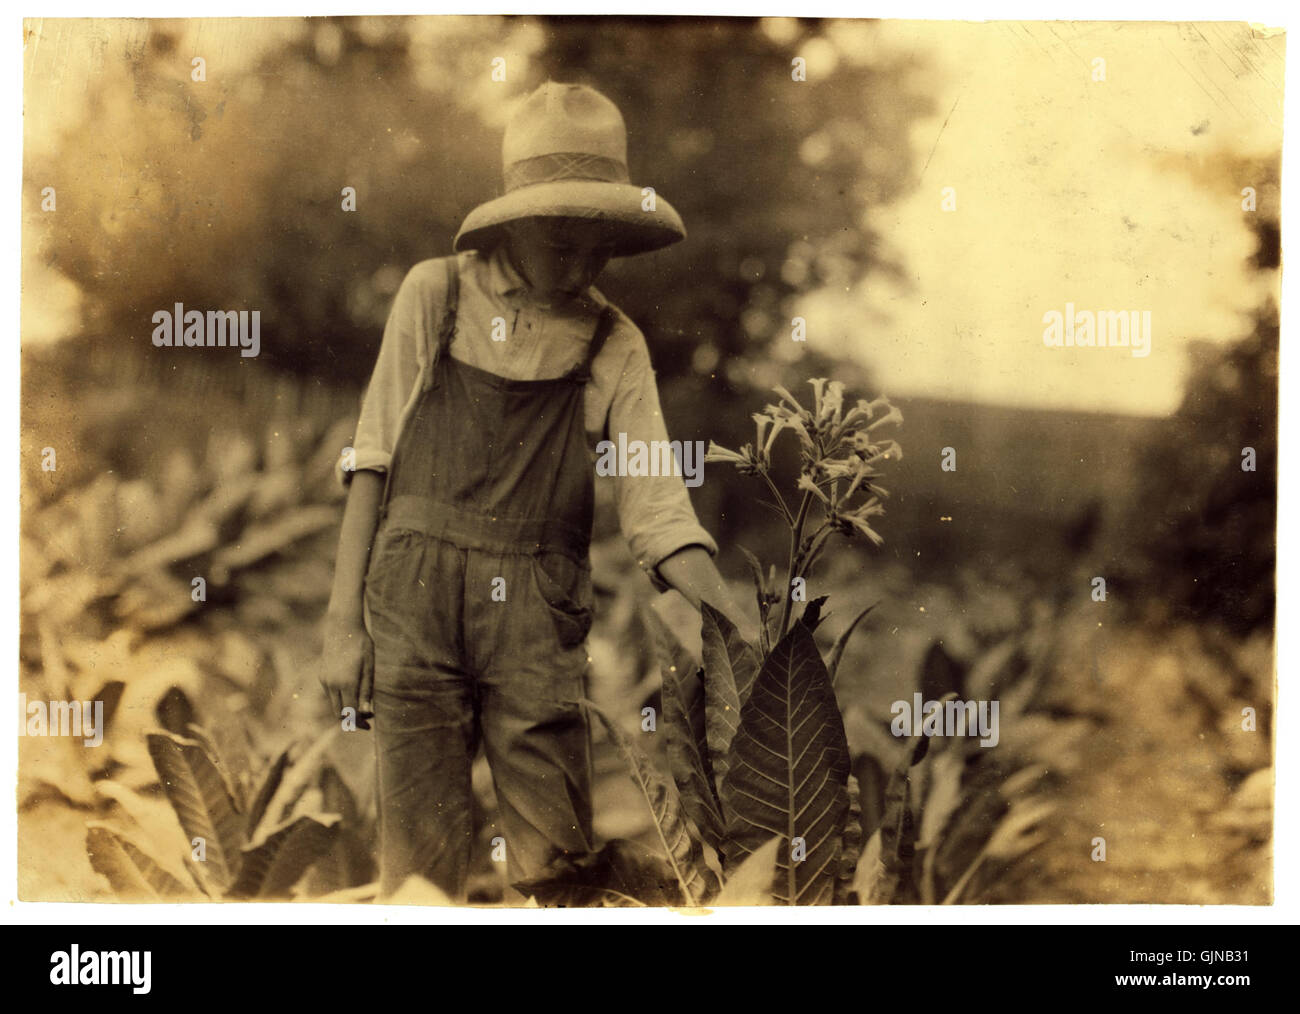 Lewis Hine, George Barbee, topping 13 Jahre alt, Nicholas County, Kentucky, 1916 Stockfoto